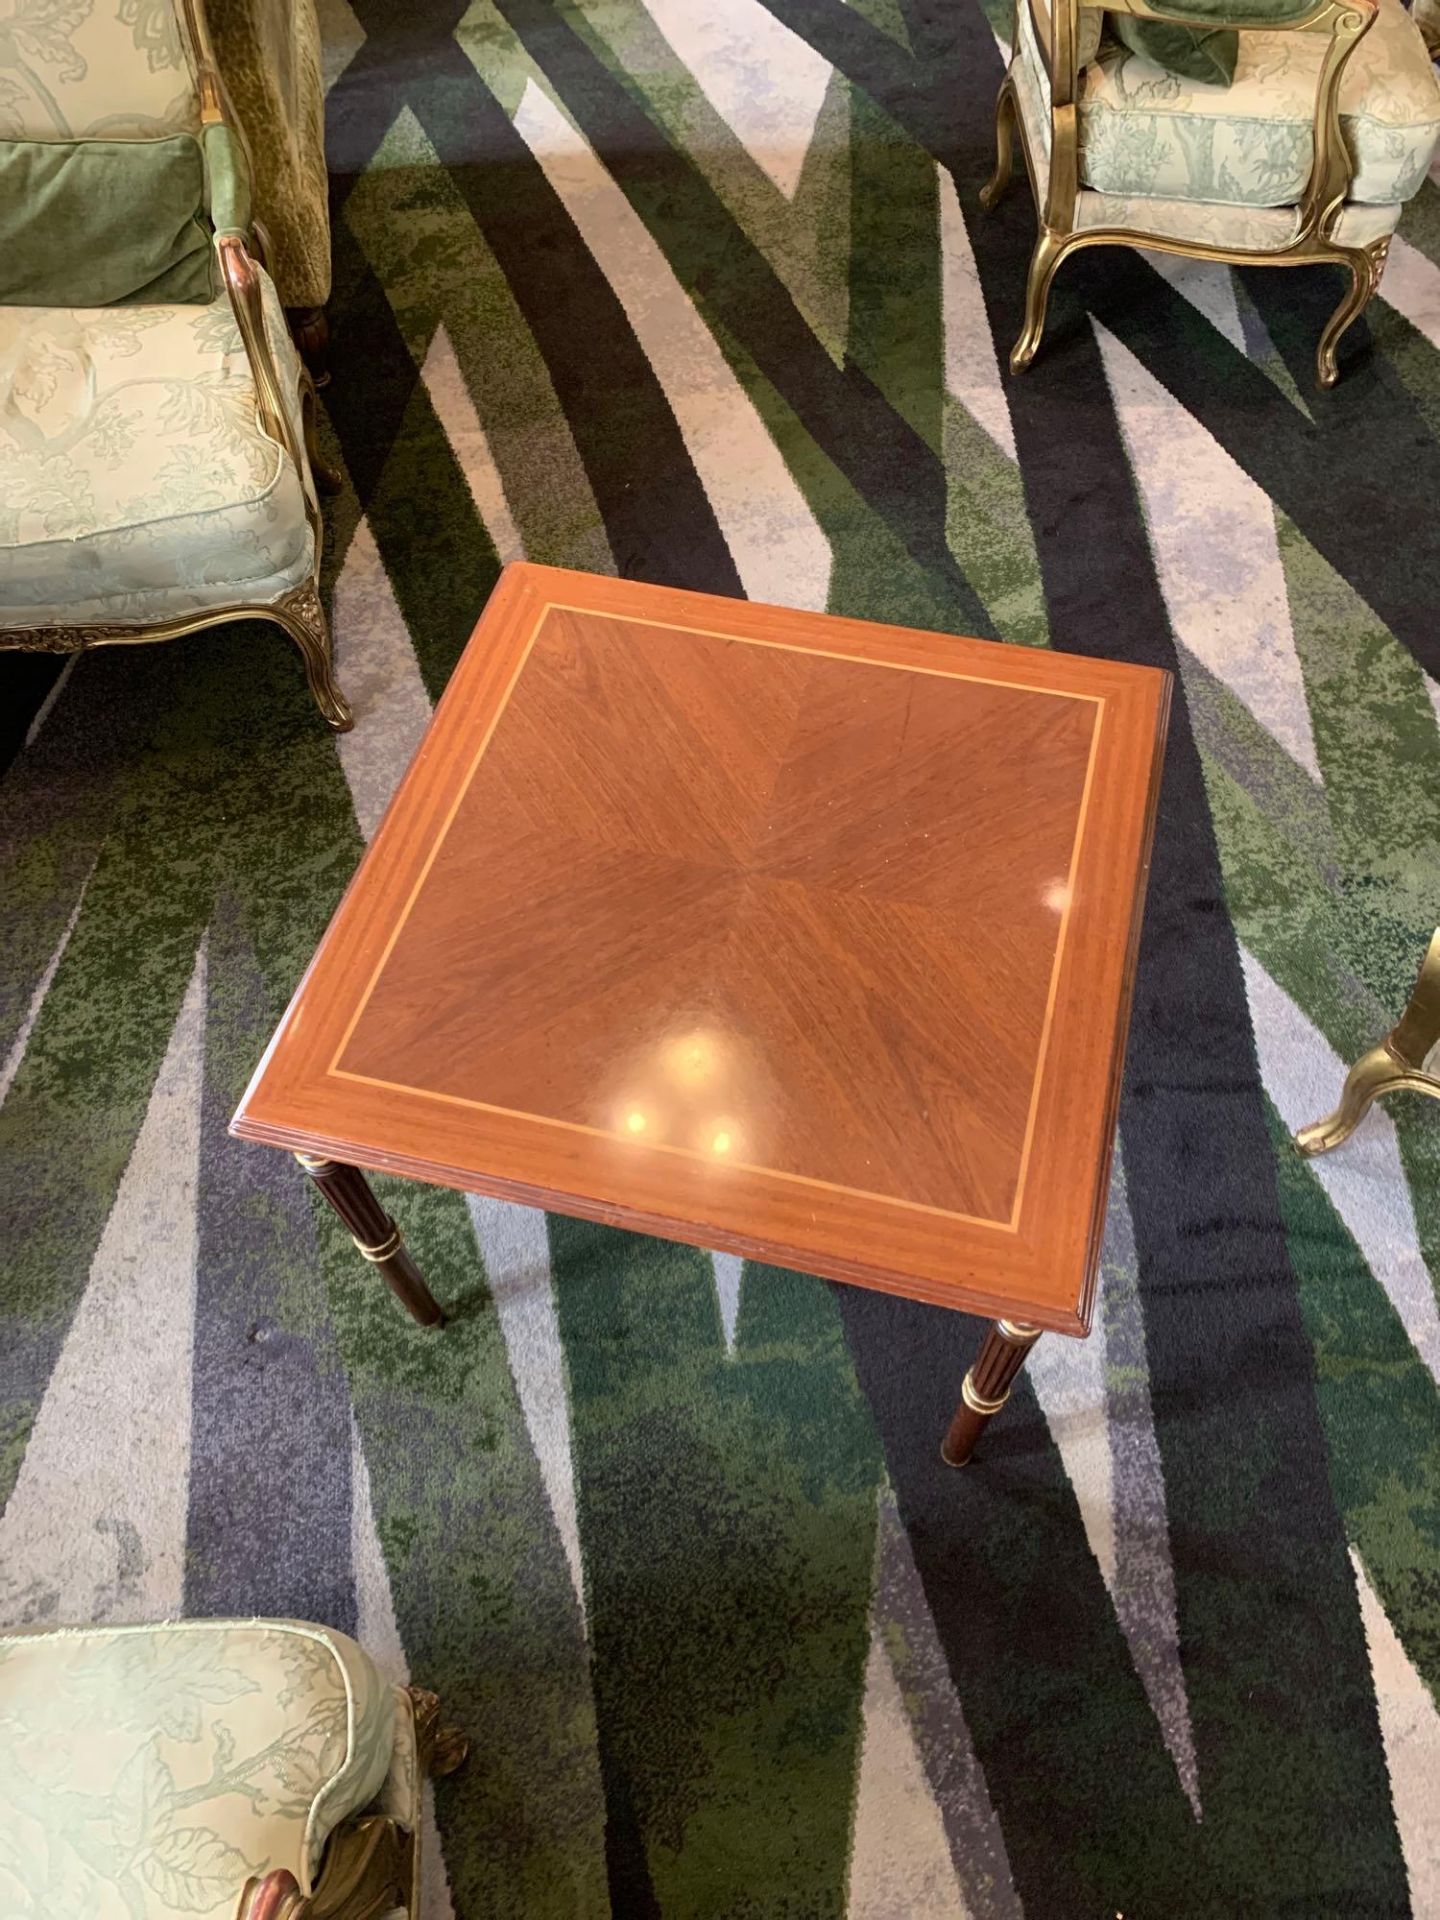 Square Coffee Table With Chess Board Design Inlay Top With Gilt Highlights Mounted On Round Turned - Bild 3 aus 4